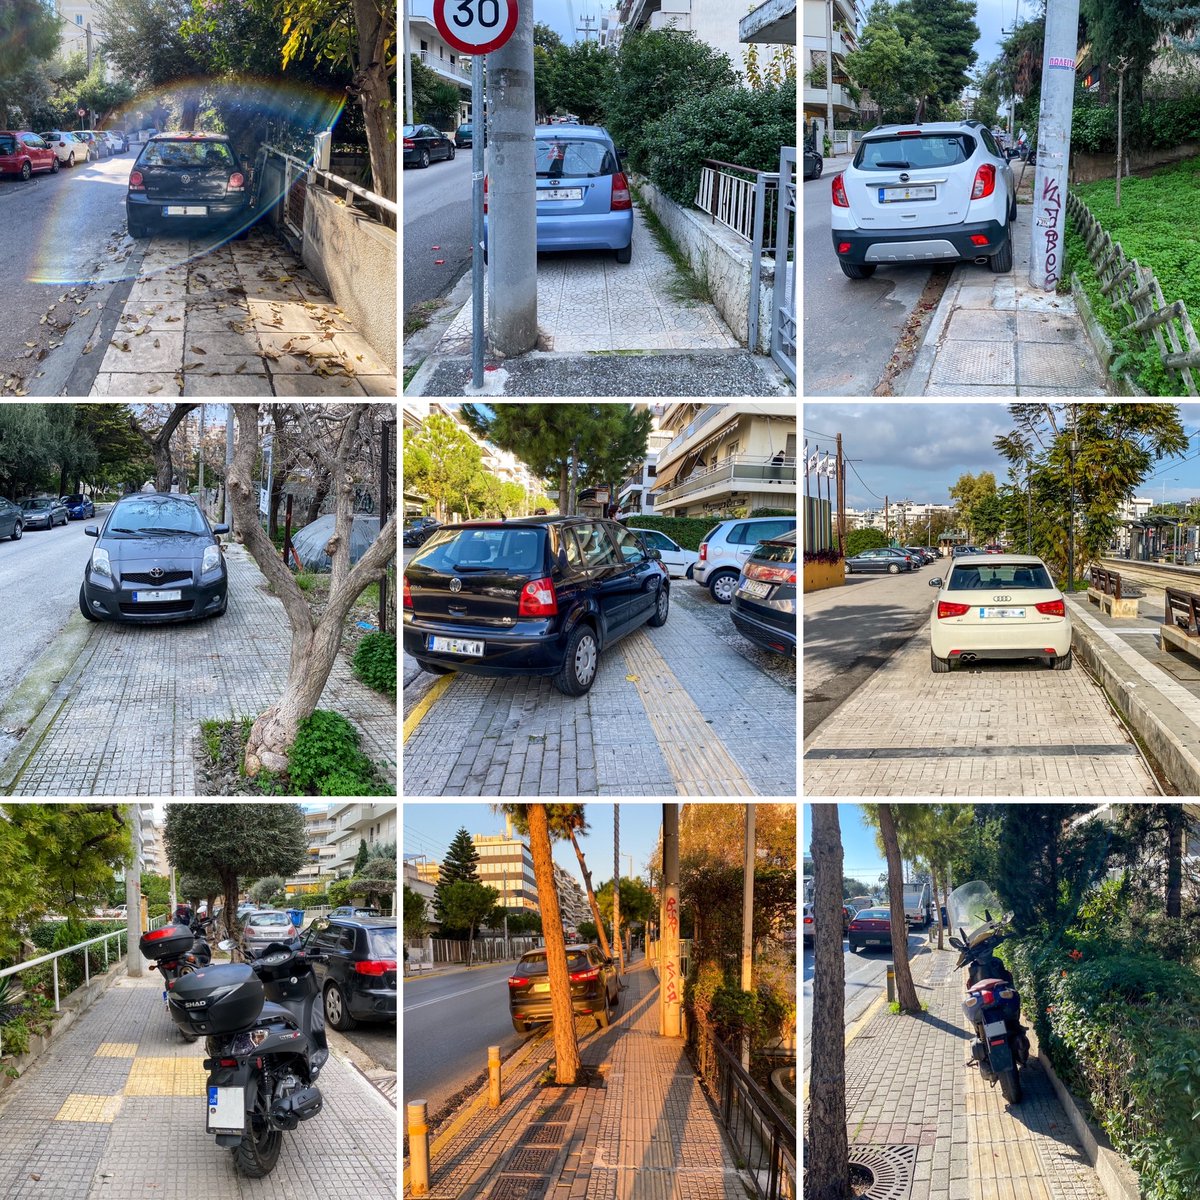 First rule: sidewalks are *not* for pedestrians. They function chiefly as overflow parking. If there is enough space on the sidewalk, a car or motorcycle will appear. Vehicles win—every time. (Photos taken around Alimos and Palaio Faliro.)